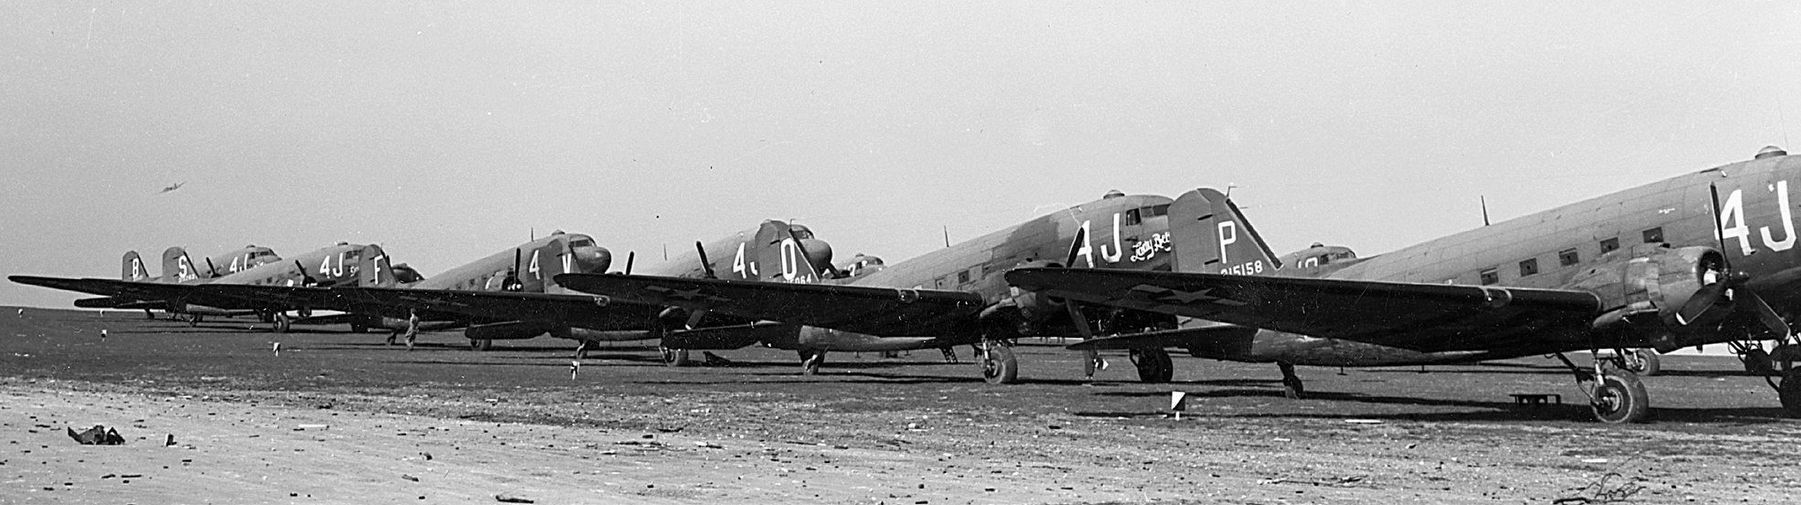 C-47s of the 305th Troop Carrier Squadron of the 442<sup>nd</sup> Troop Carrier Group image. Click for full size.